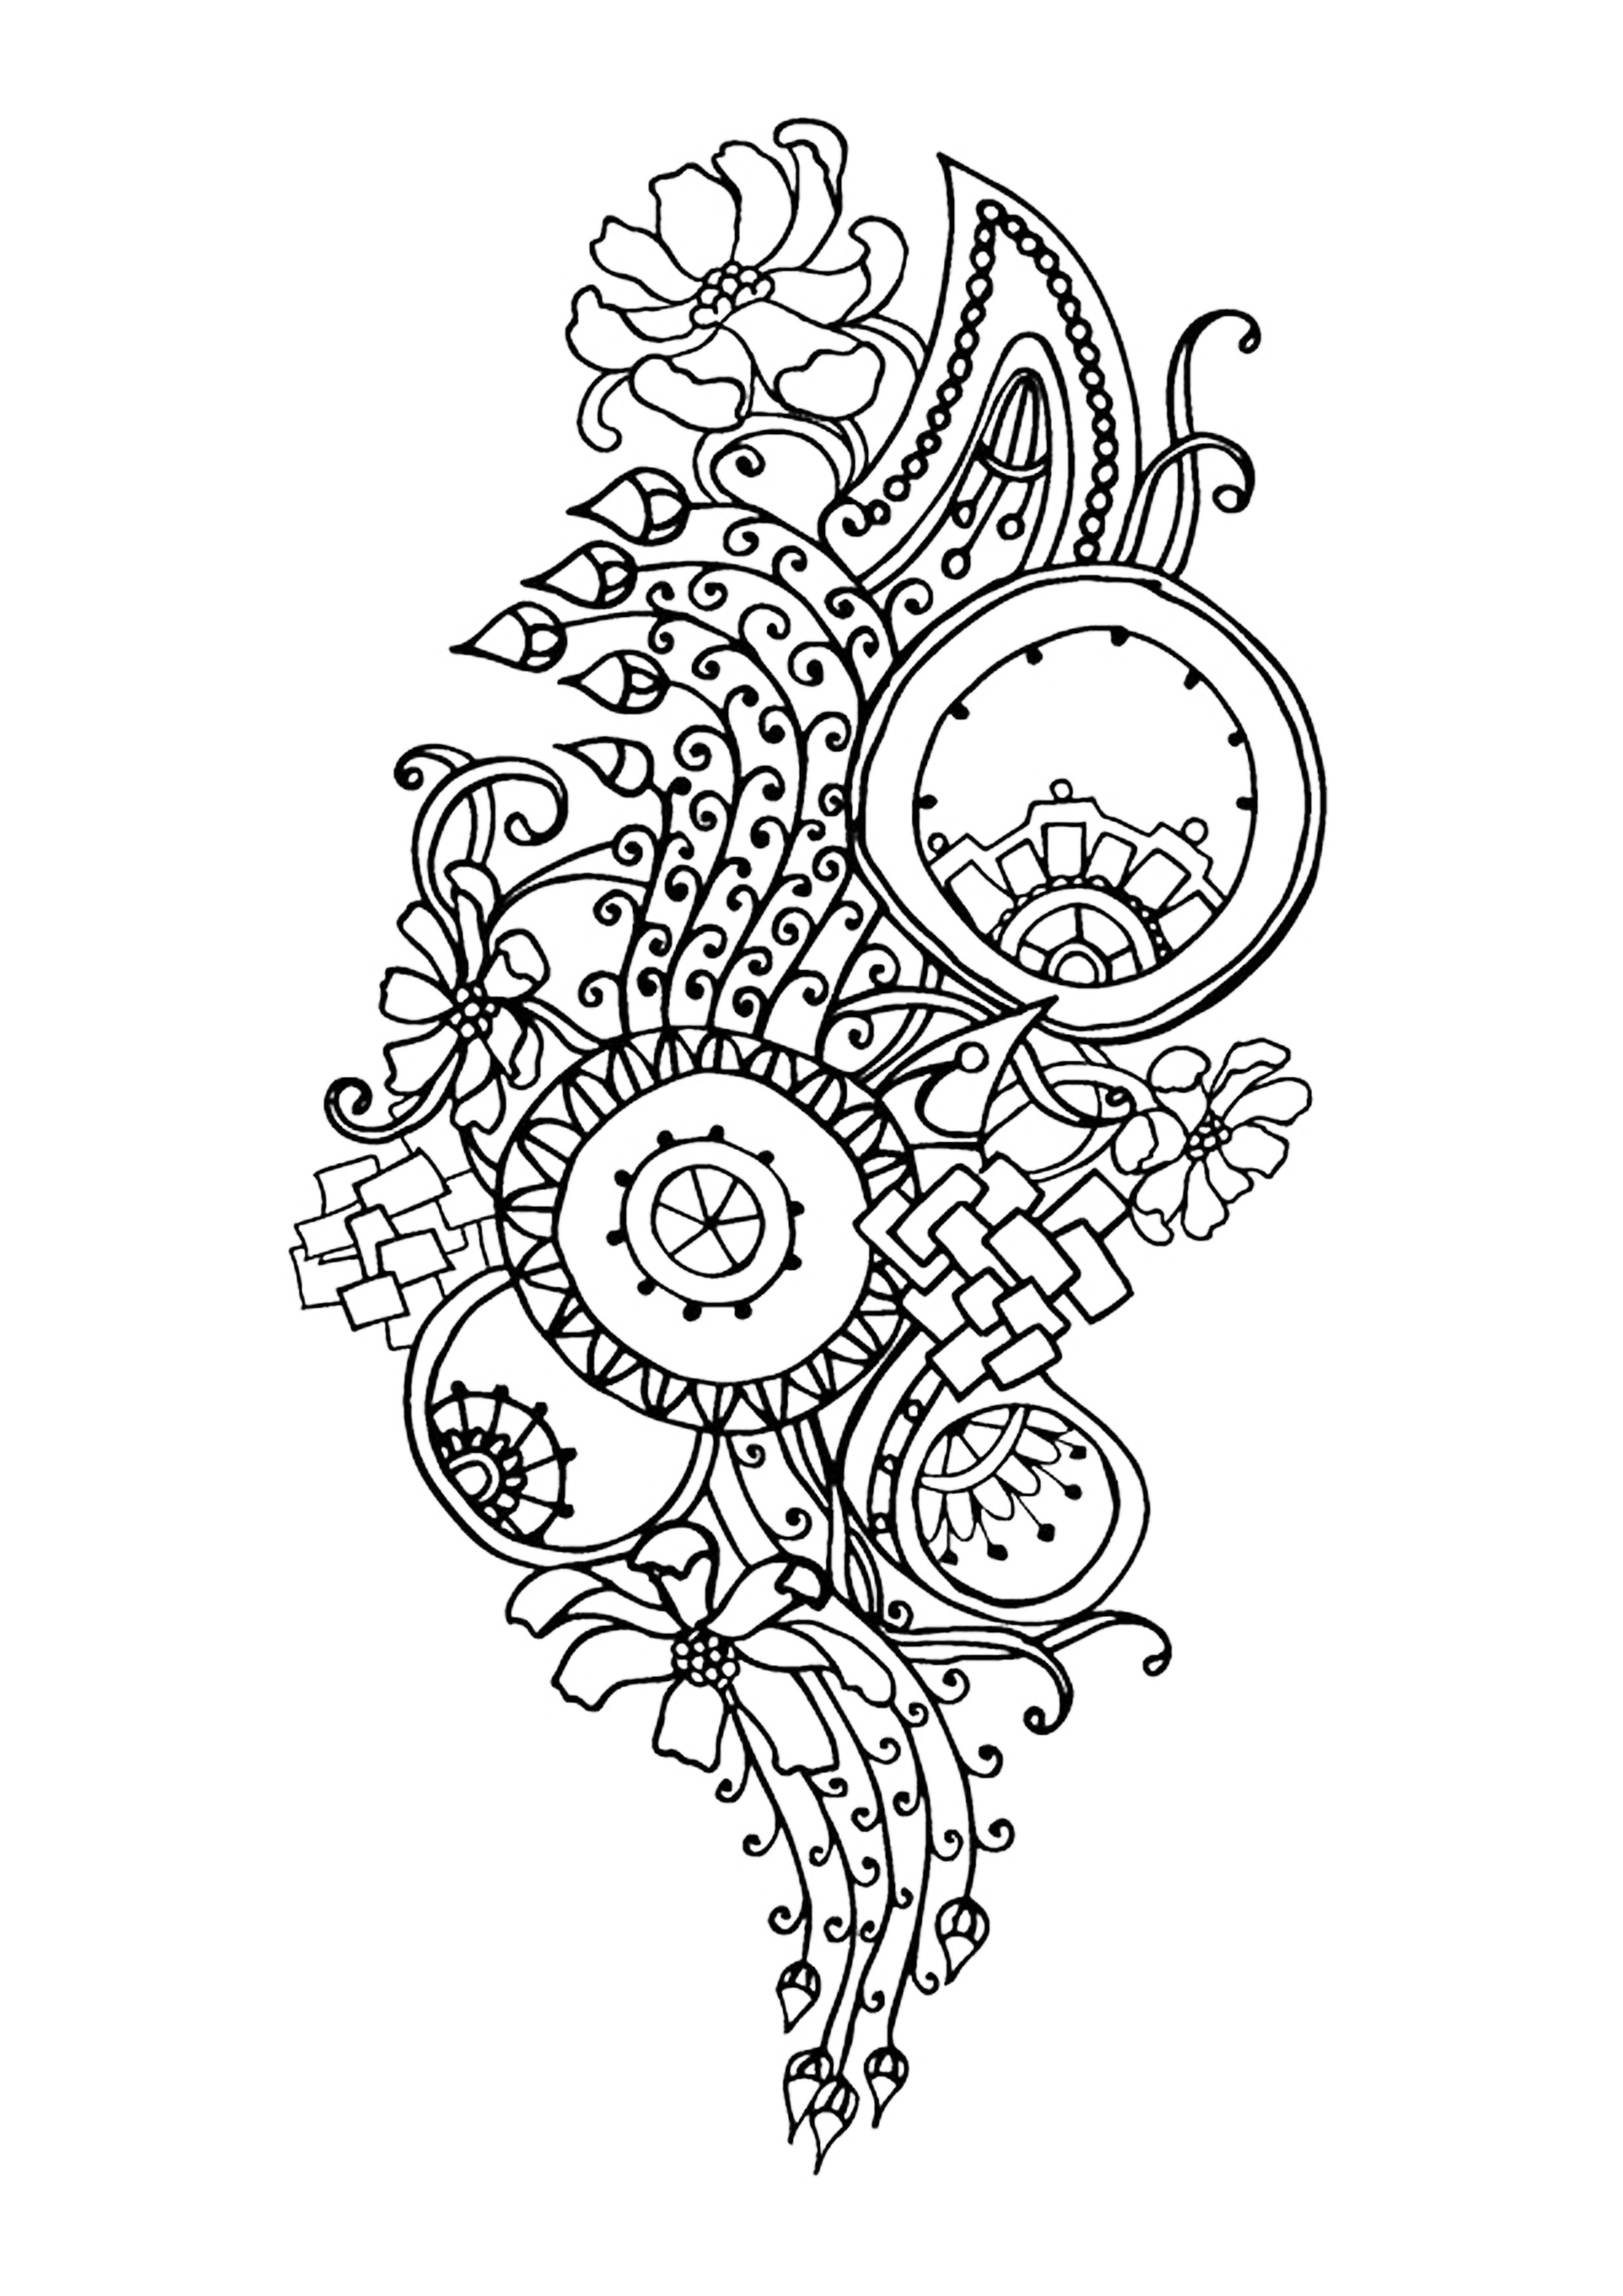 Zen antistress abstract pattern inspired - Anti stress Adult Coloring Pages